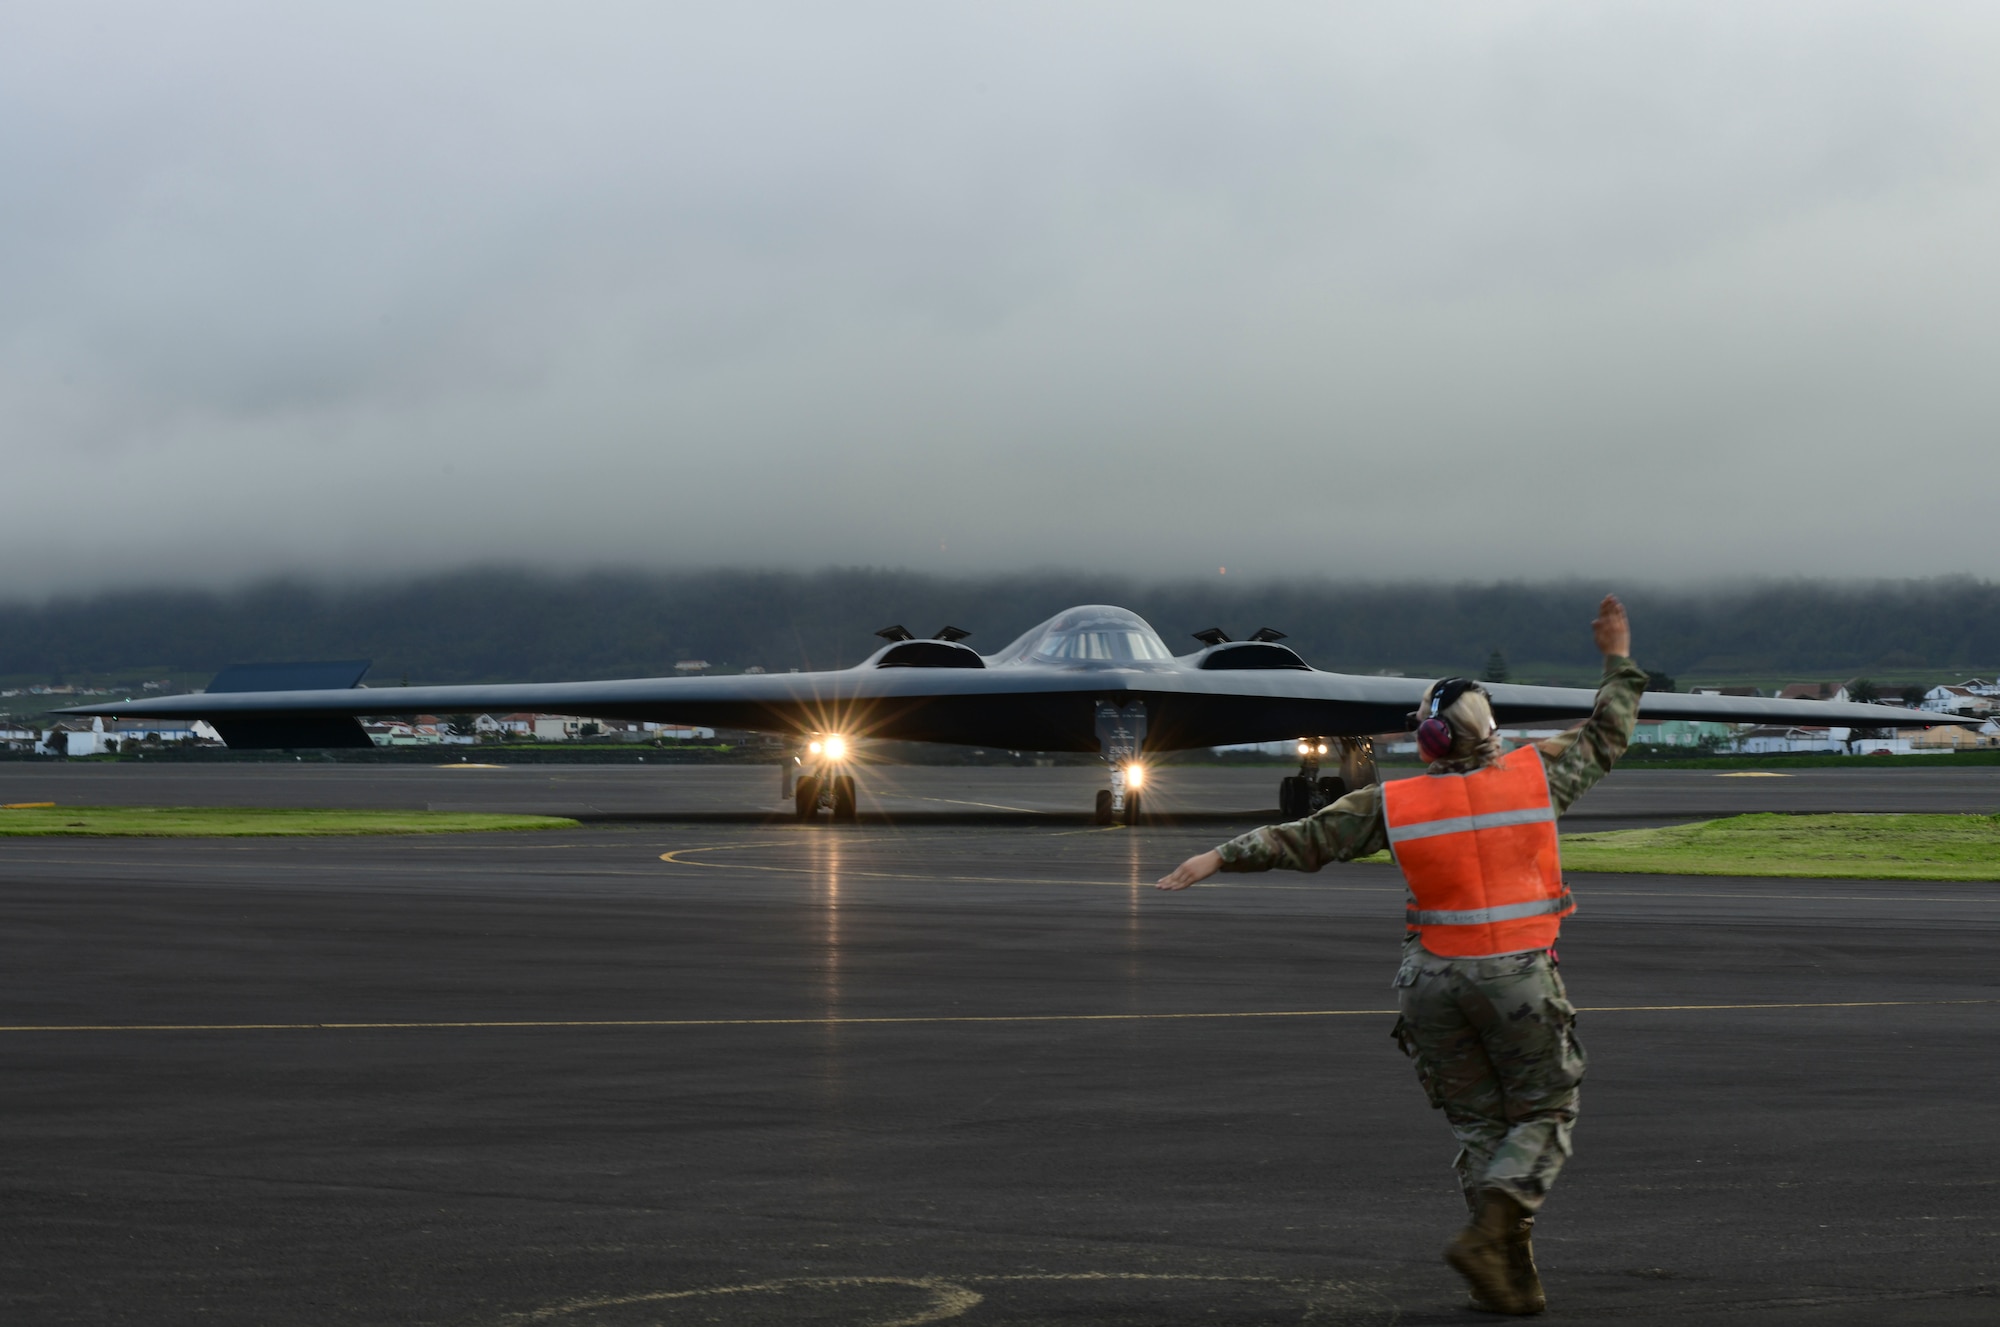 The B-2’s deployment to Lajes Field provides a staging point allowing commanders to confront a broad range of global challenges in support of the National Defense Strategy, through the employment of a multi-role bomber.